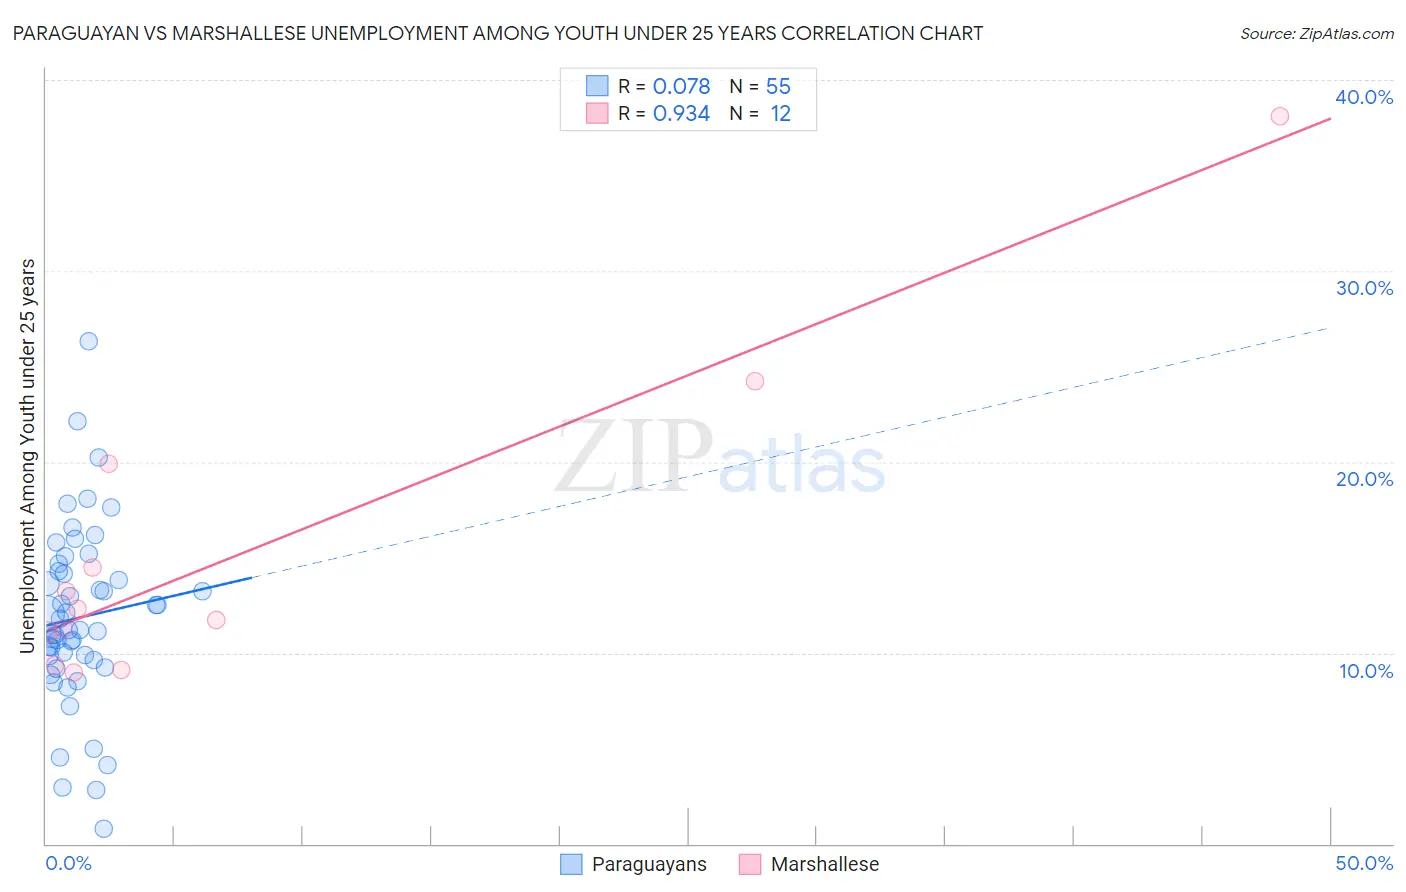 Paraguayan vs Marshallese Unemployment Among Youth under 25 years